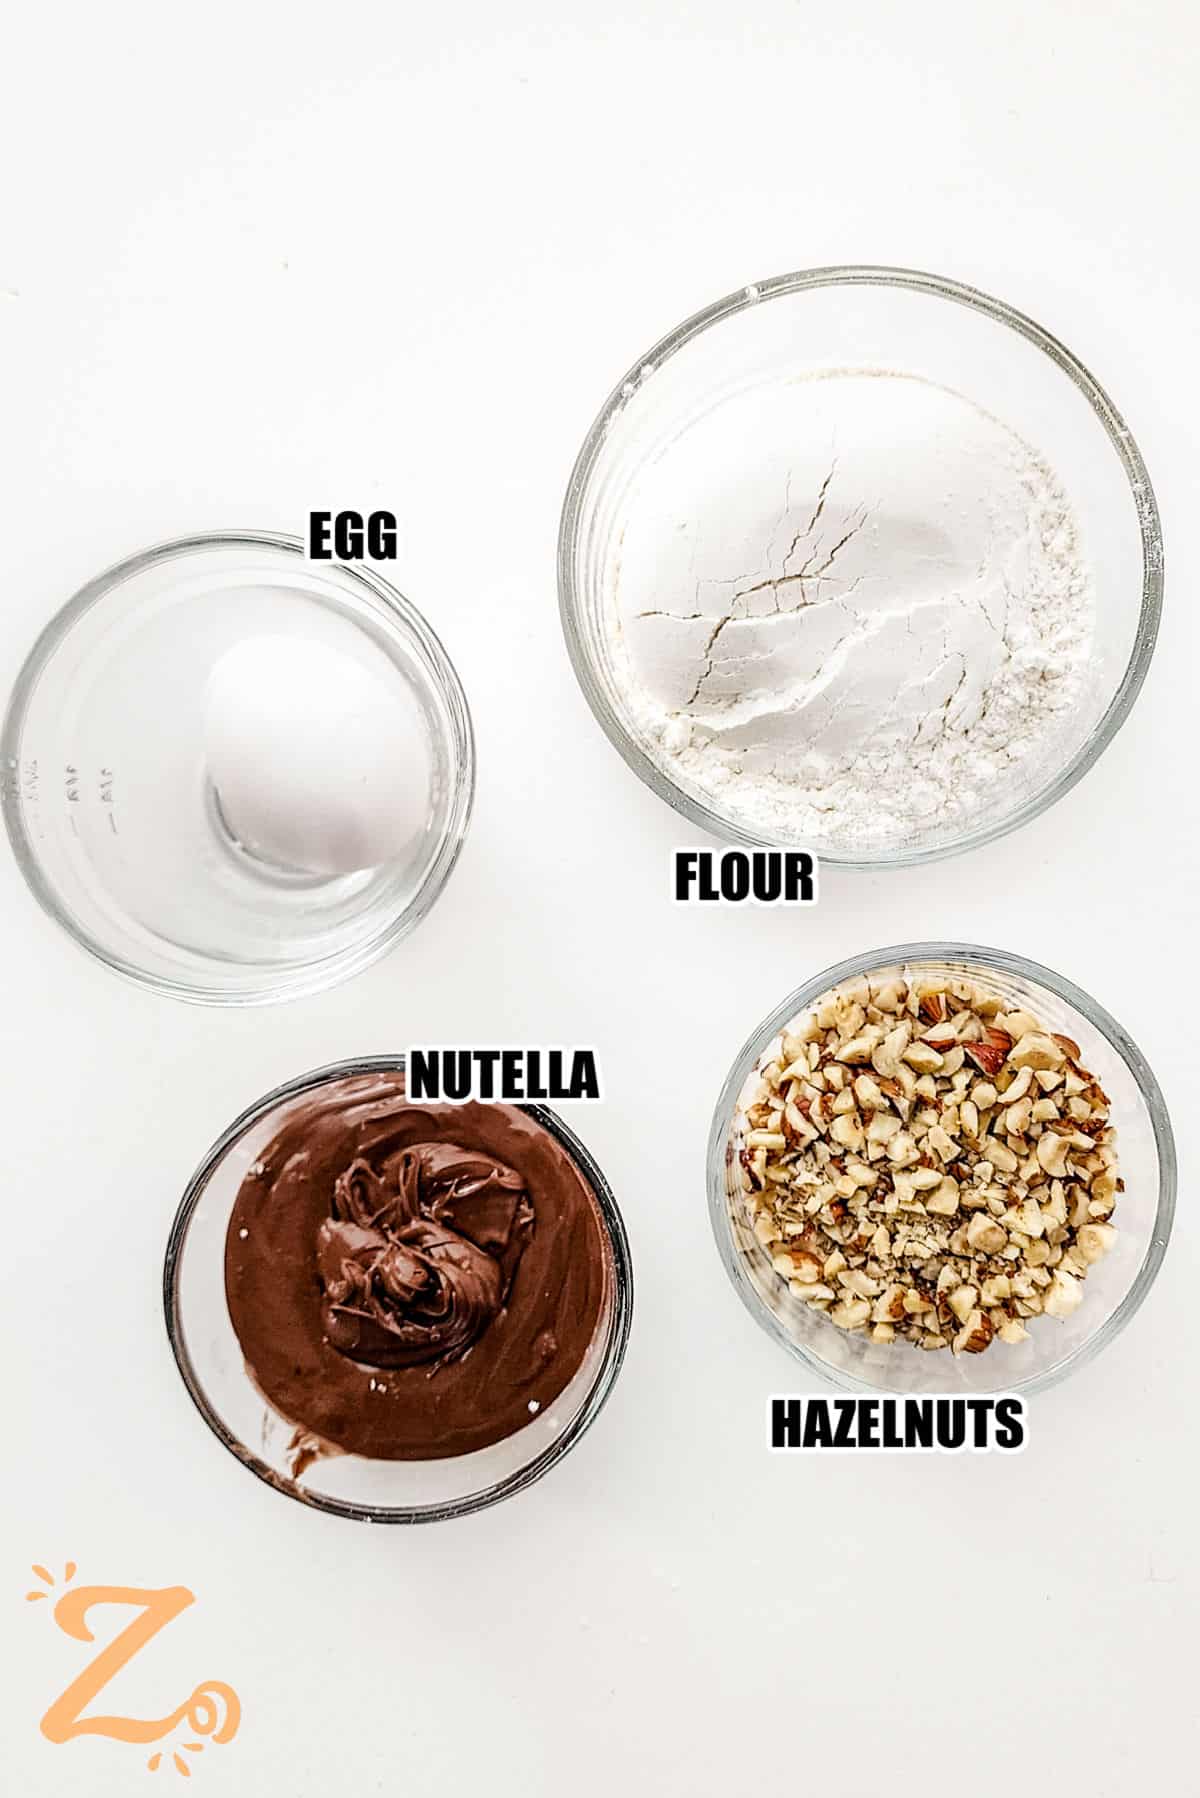 egg , flour, Nutella, hazelnuts with labels to make Nutella Cookies